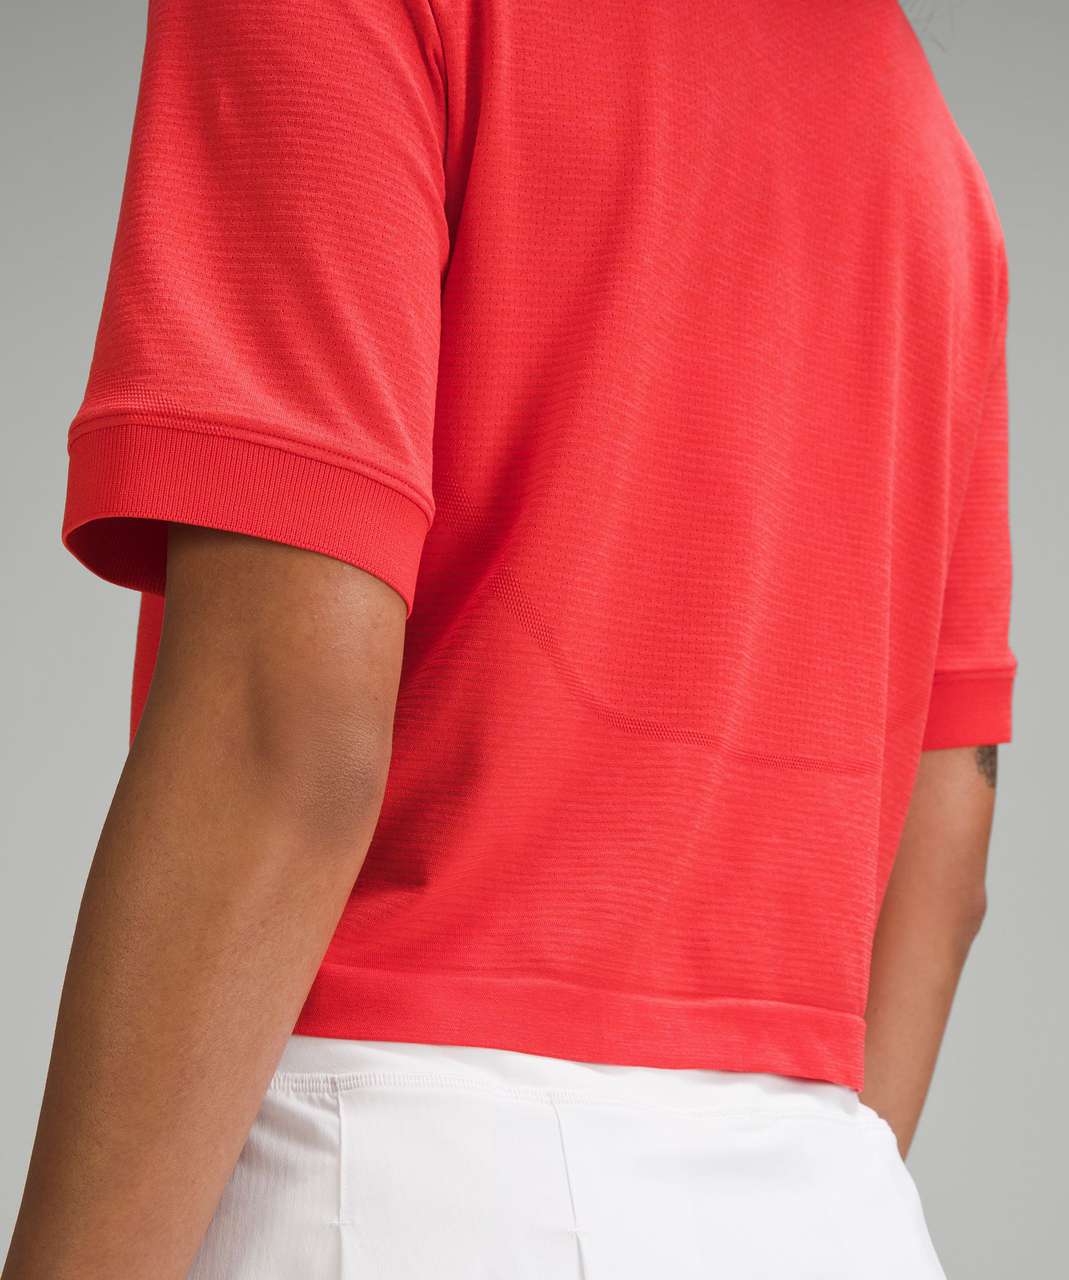 Lululemon Swiftly Tech Relaxed-Fit Polo Shirt - Hot Heat / Red Glow